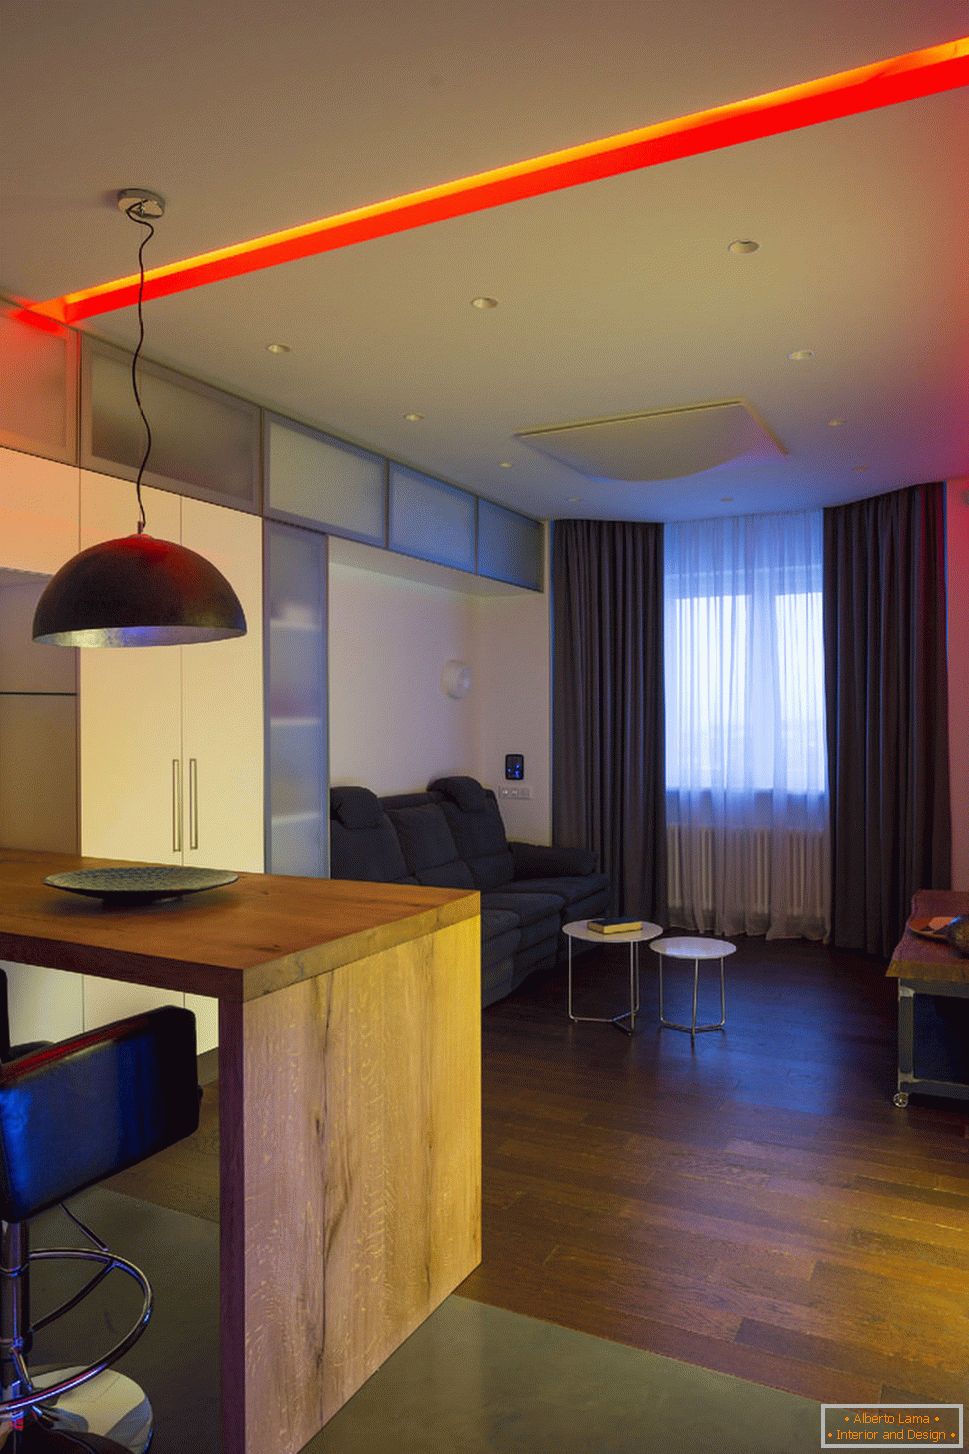 Illumination in an apartment with controlled lighting